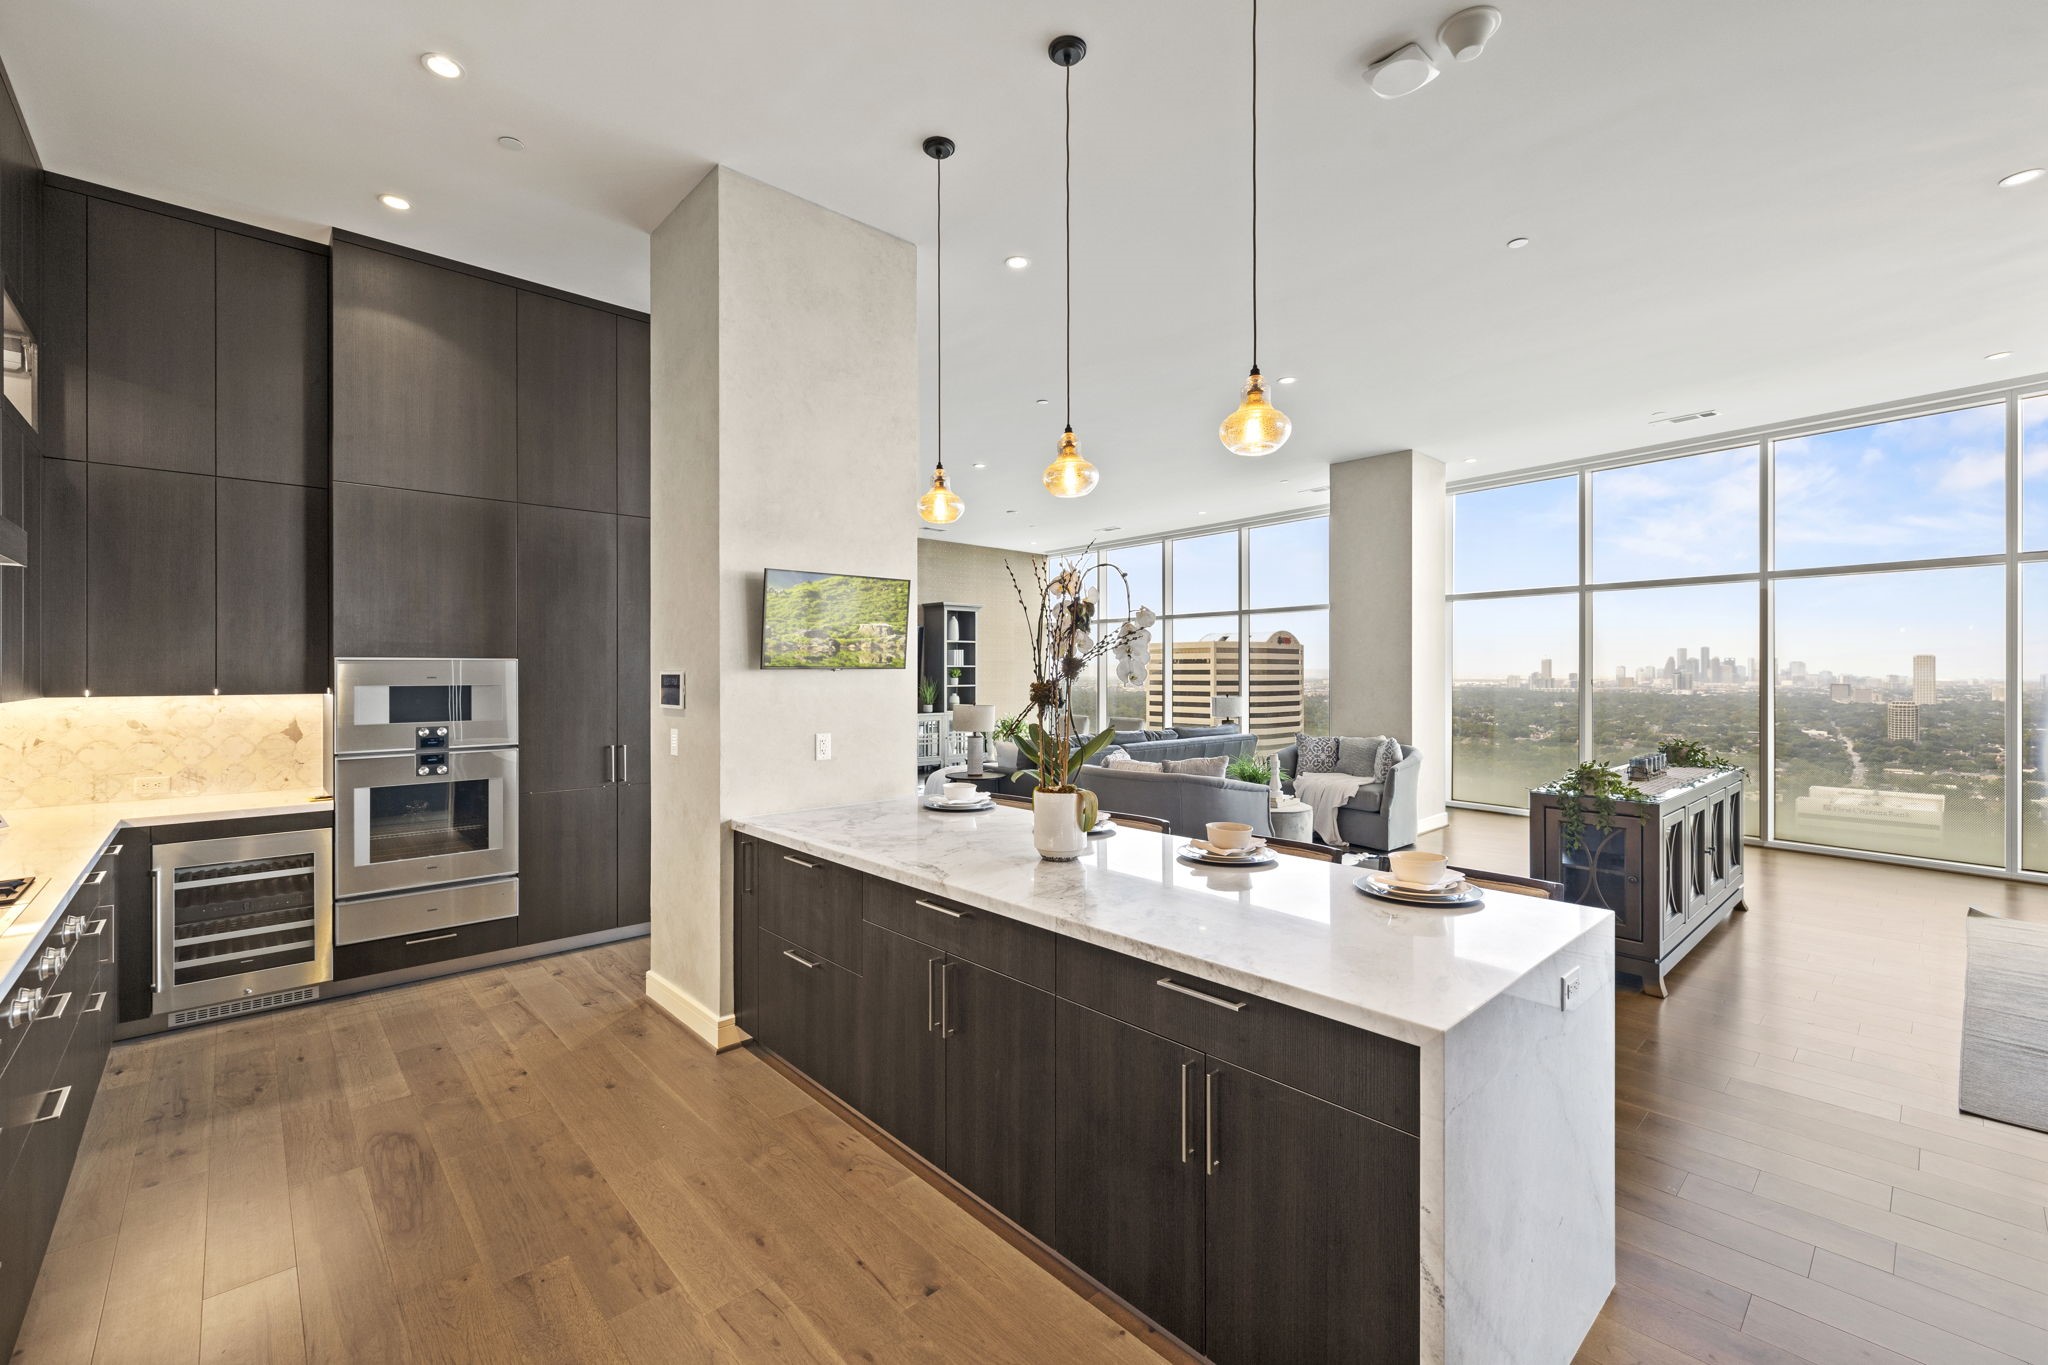 Enjoy cooking and socializing in this contemporary kitchen with a welcoming breakfast bar.